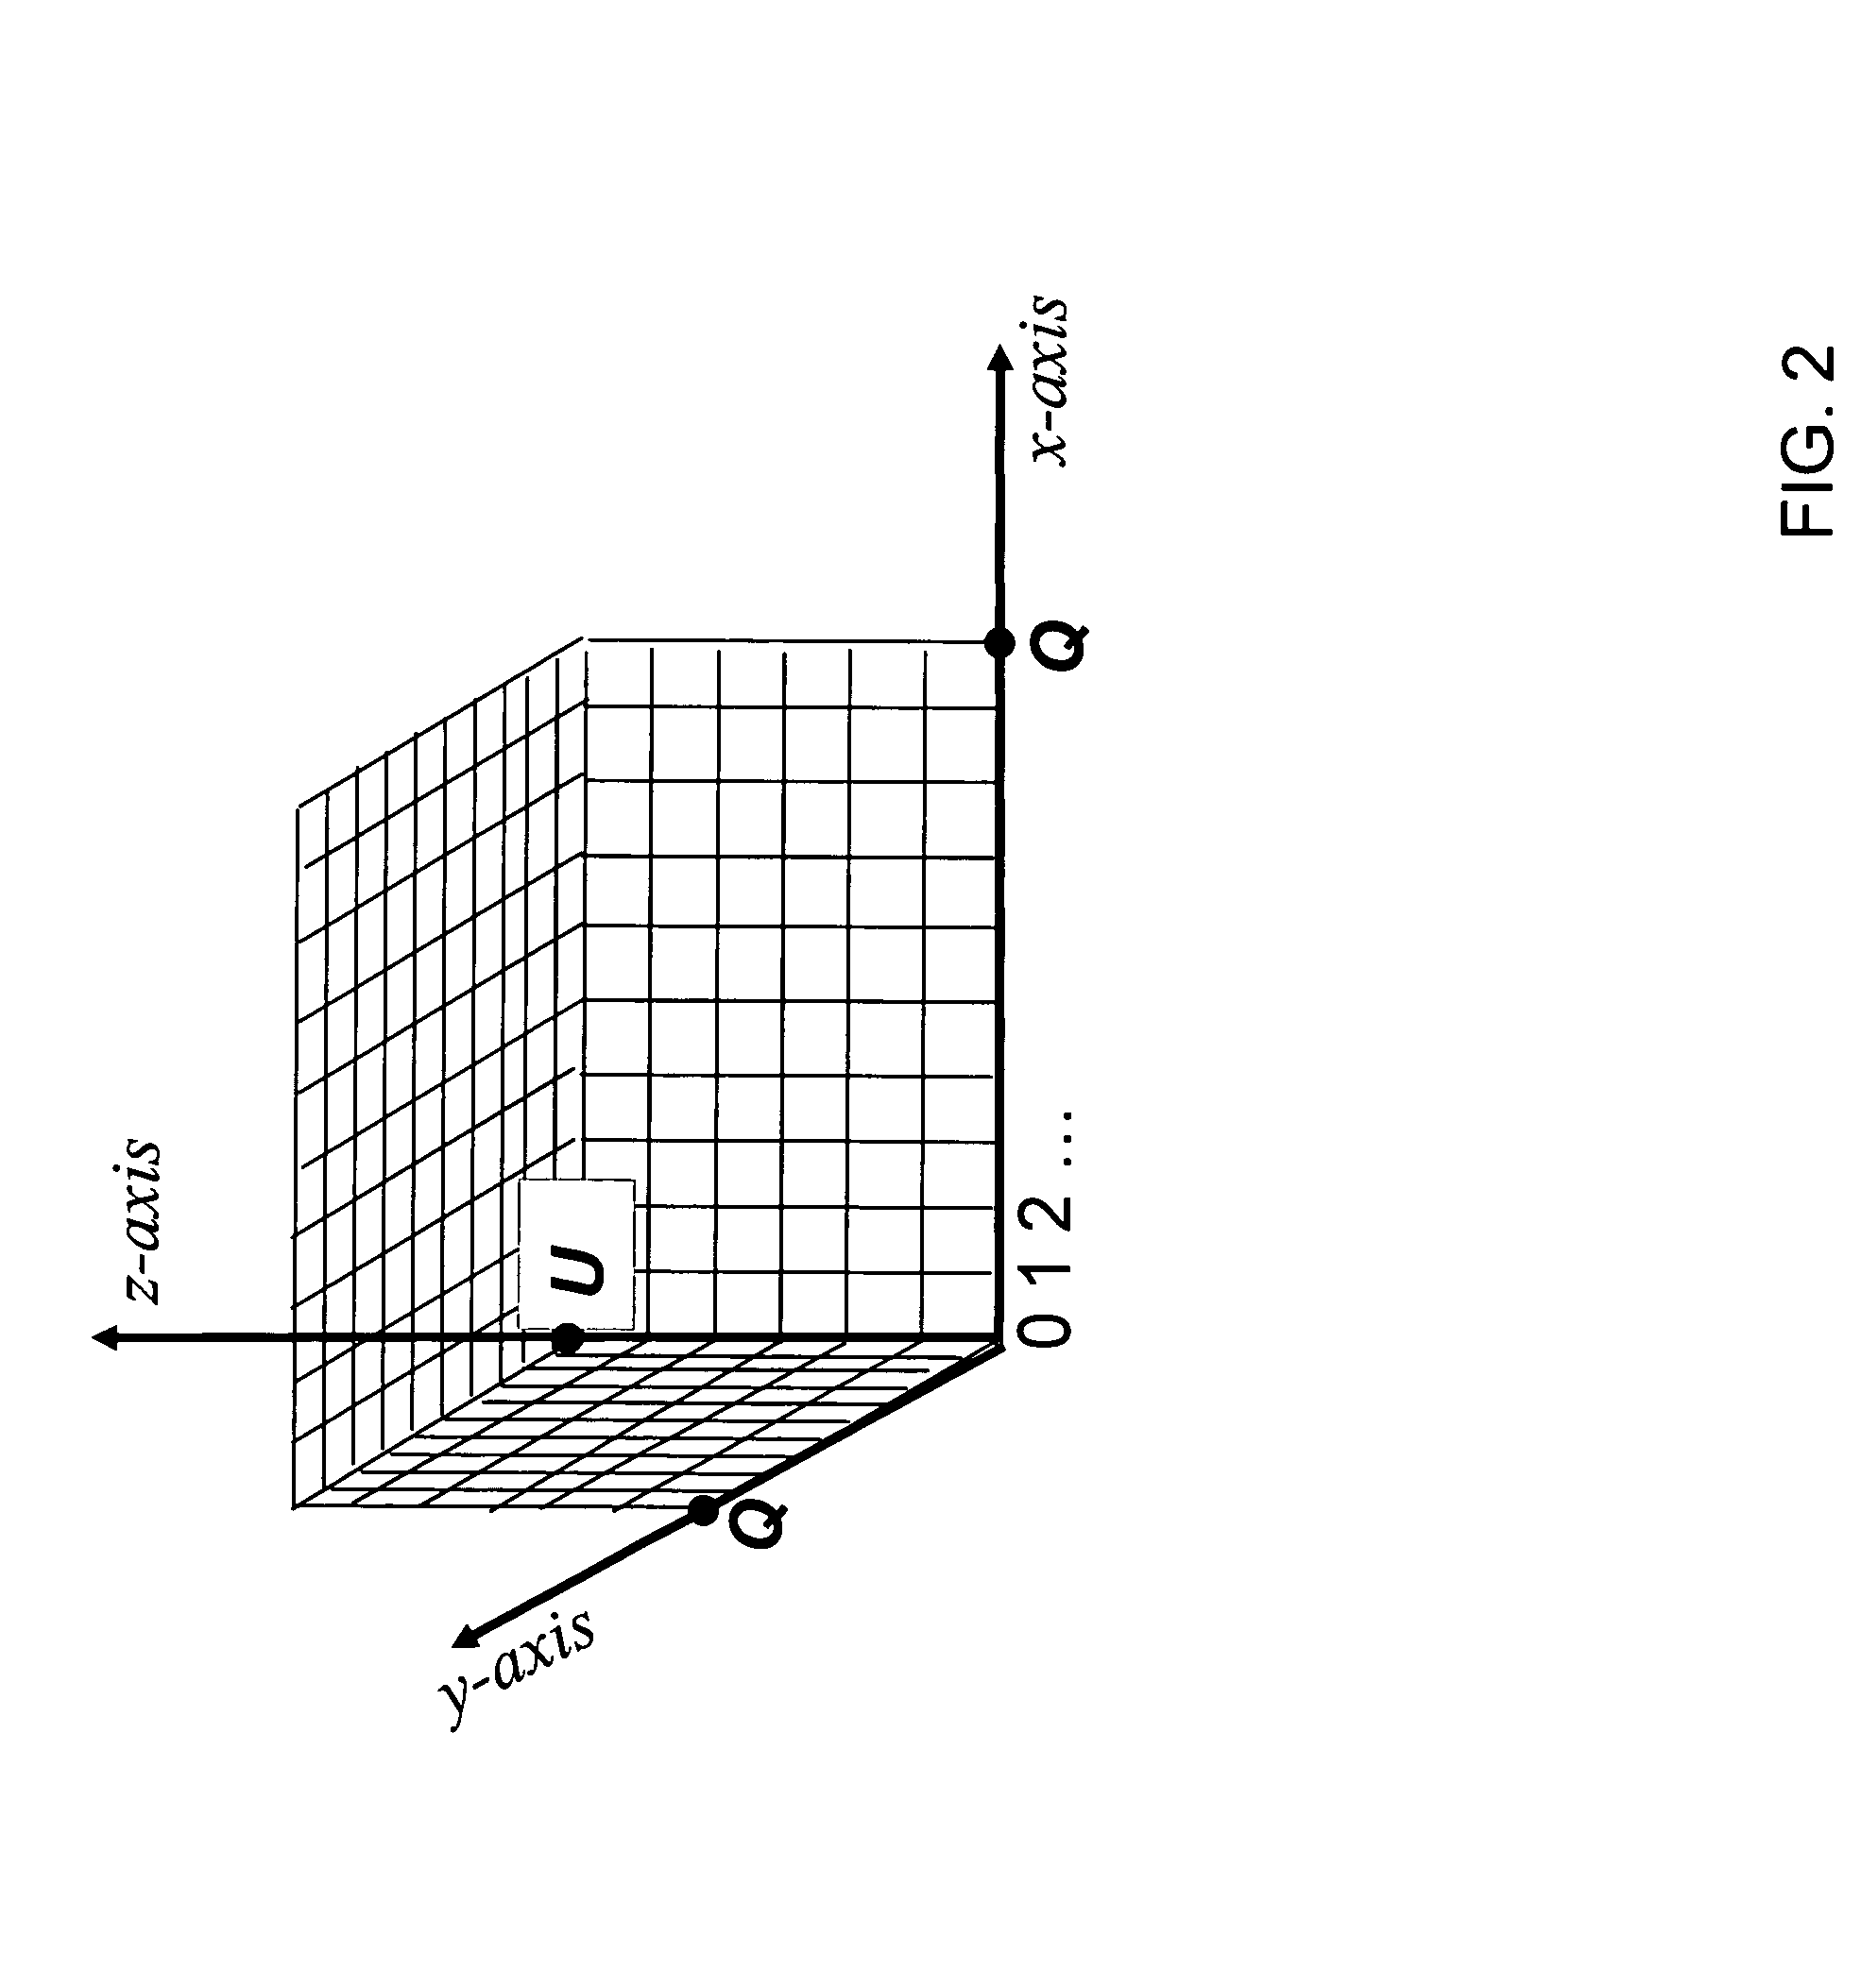 Asymptotically optimal modulation classification method for software defined radios